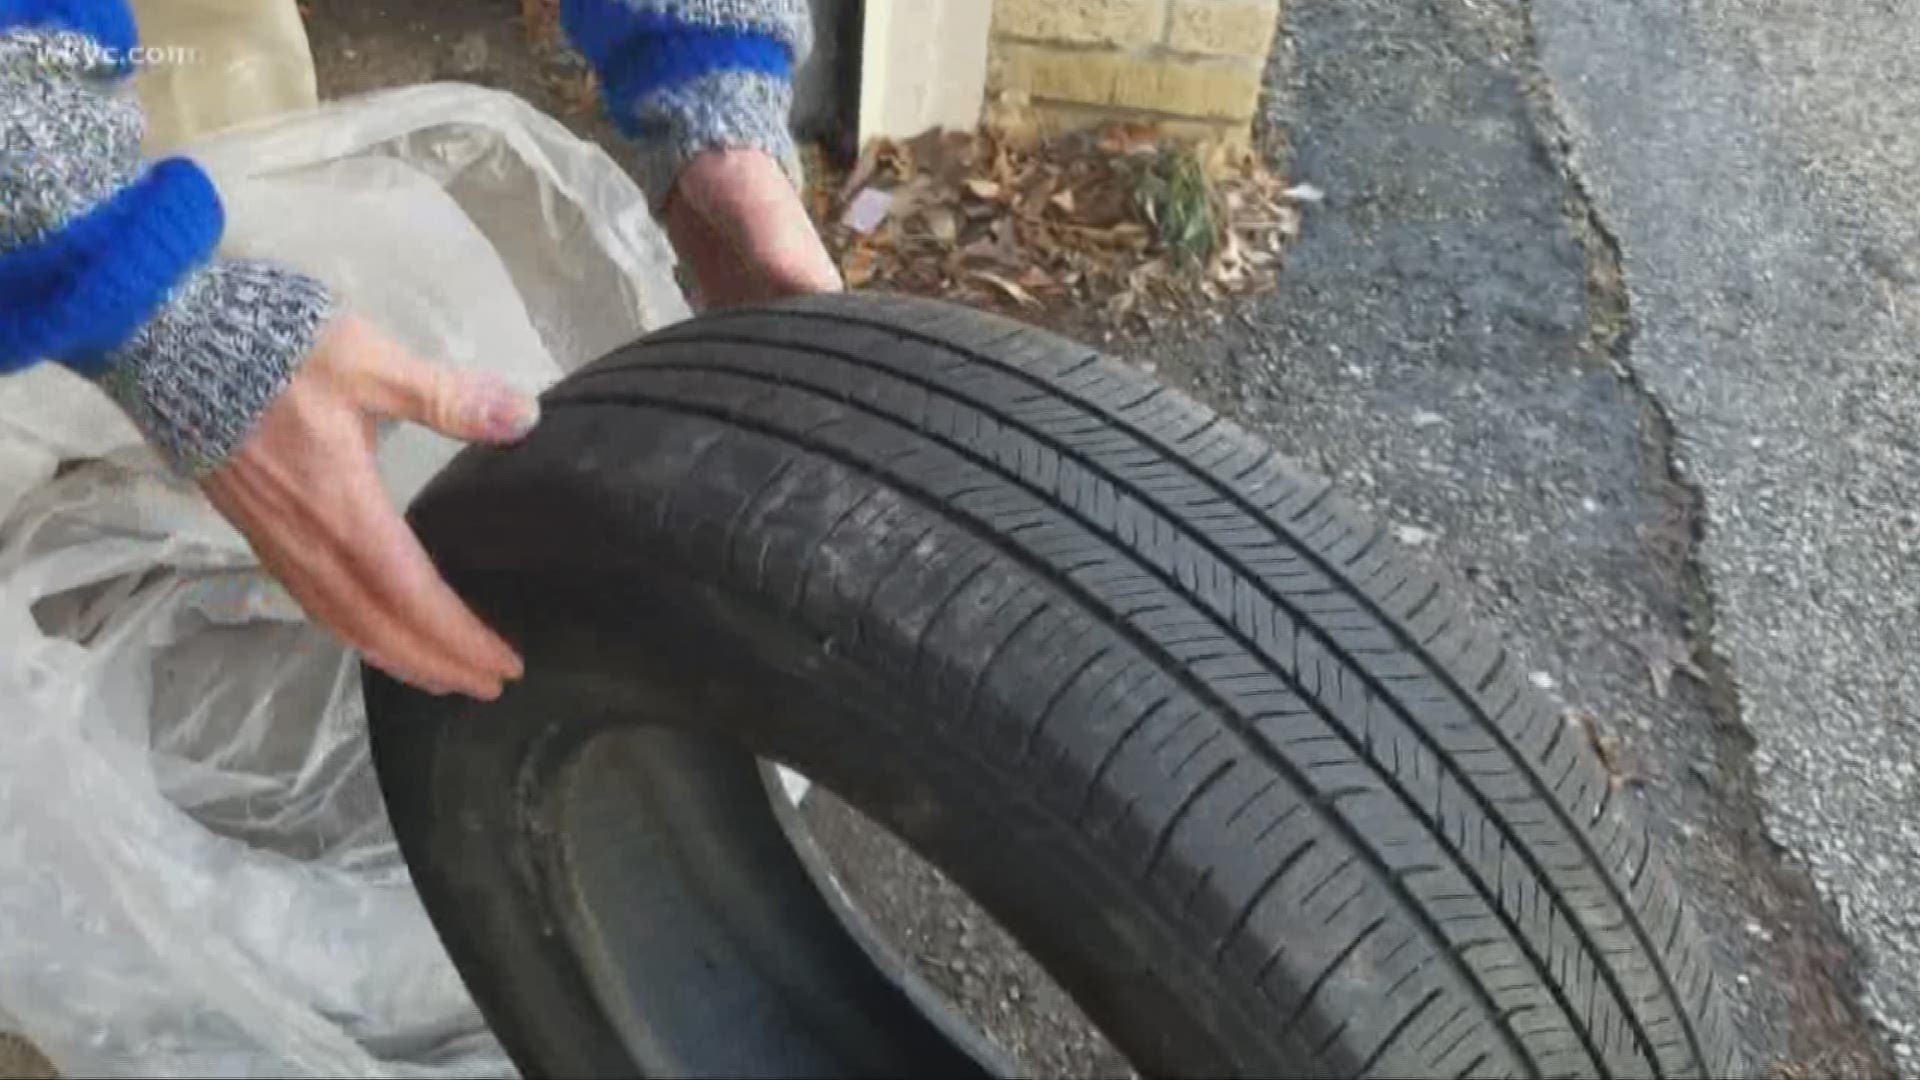 The Investigator: Tires sold as nearly new found to be old and dangerous